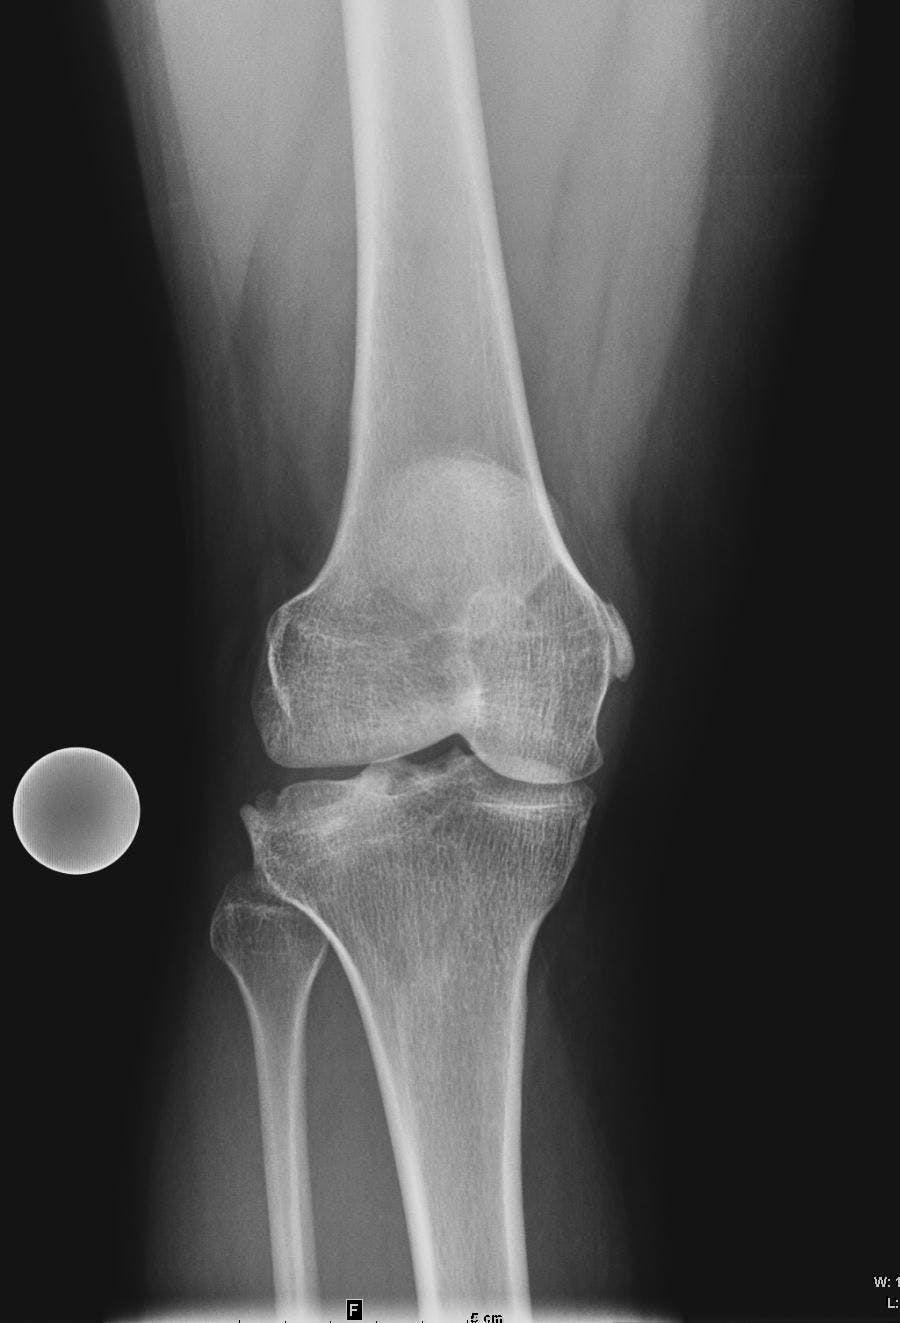 Image IQ: History of Remote Right Knee Injury